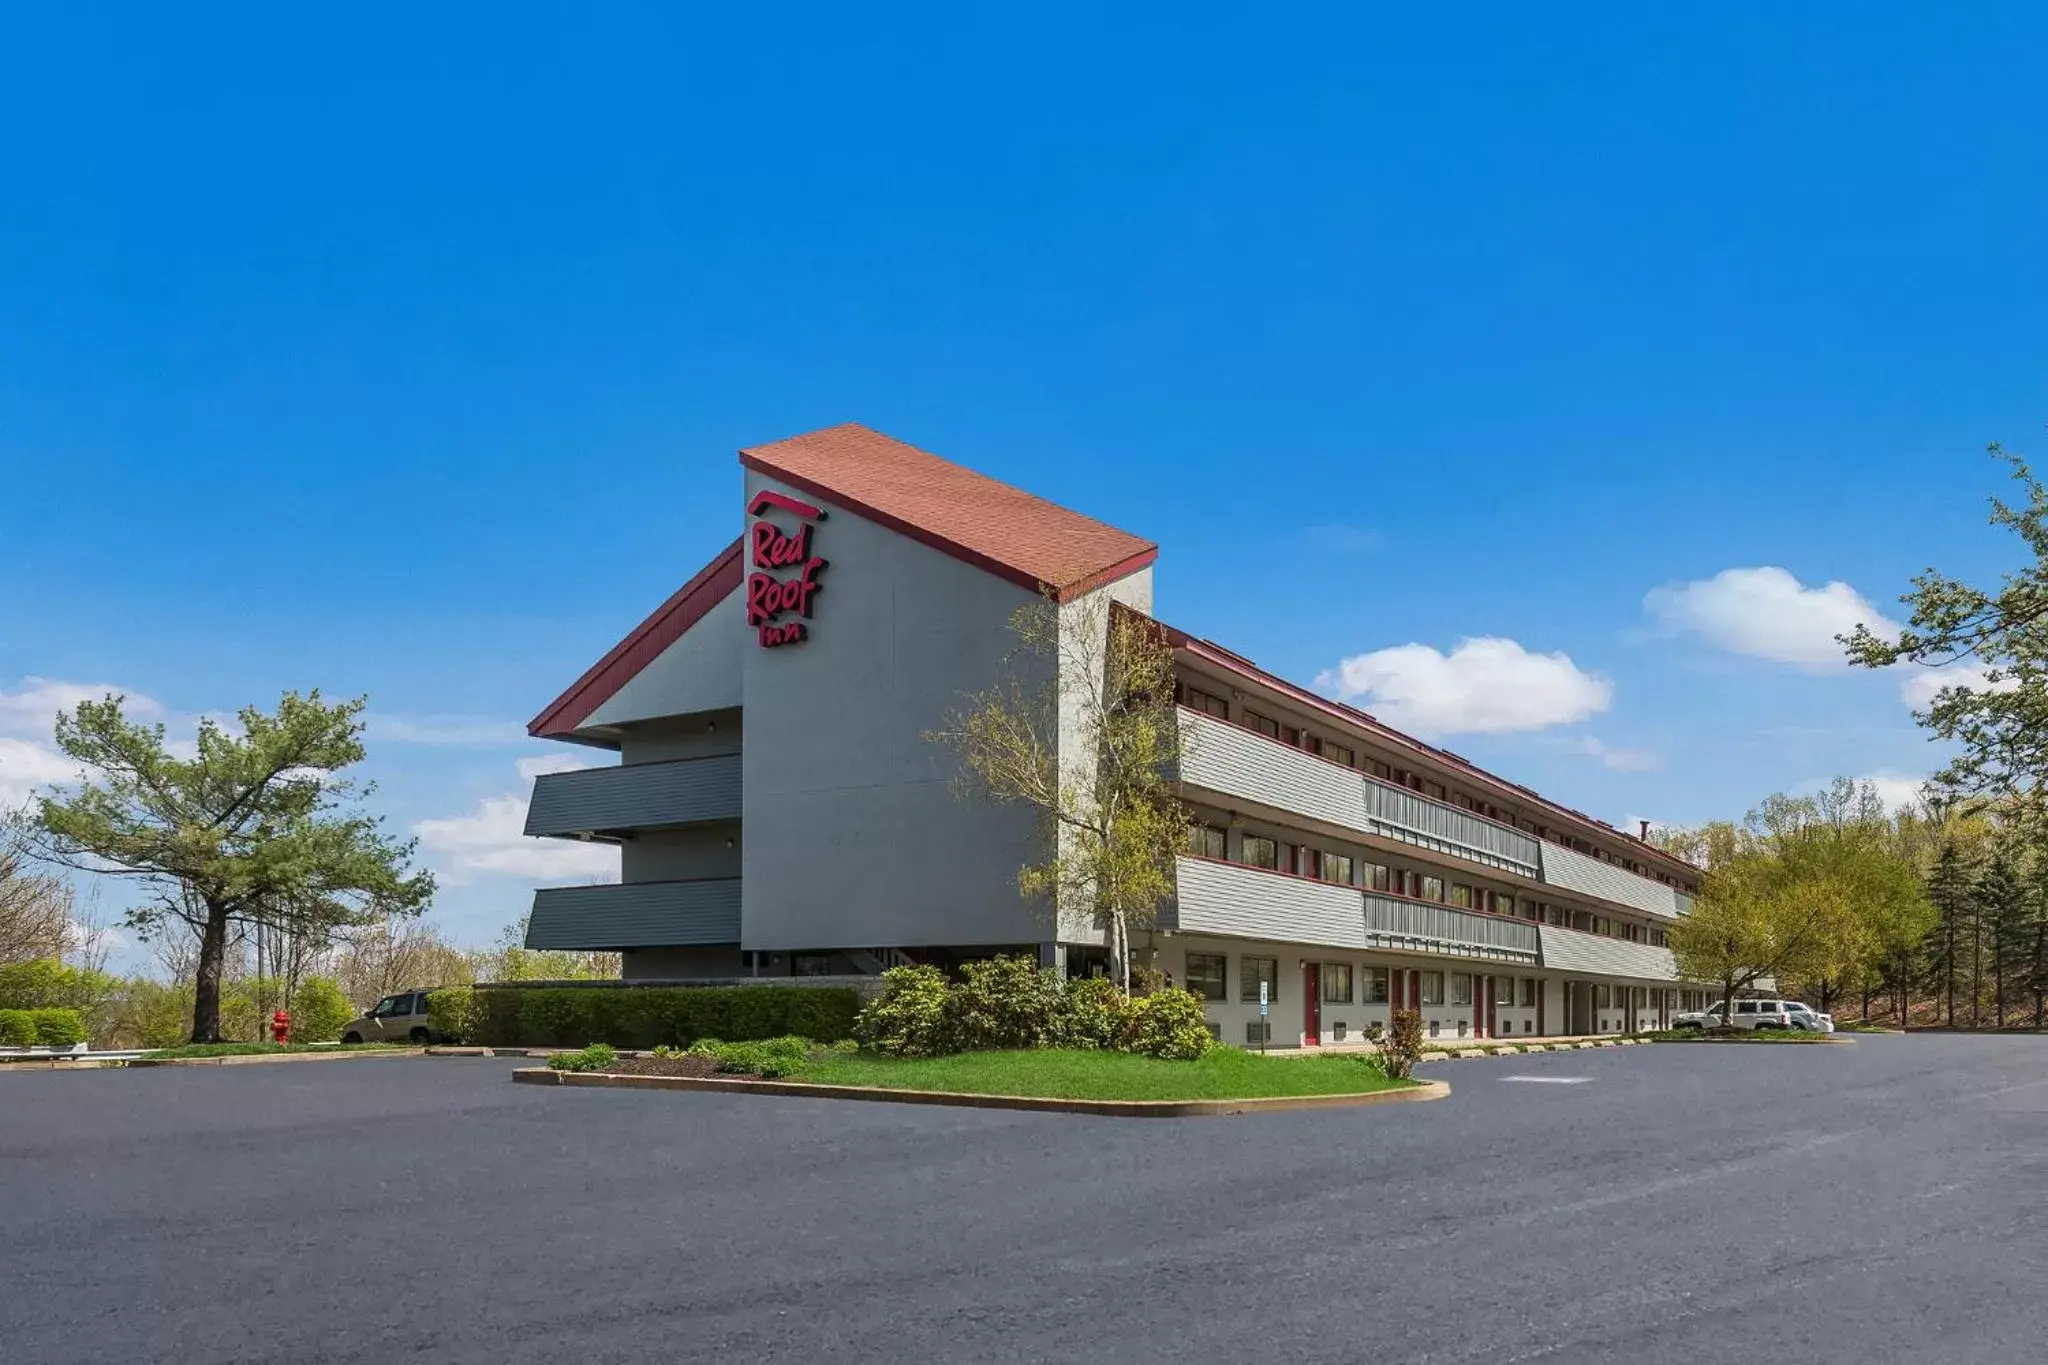 Property Building in Red Roof Inn Wilkes-Barre Arena